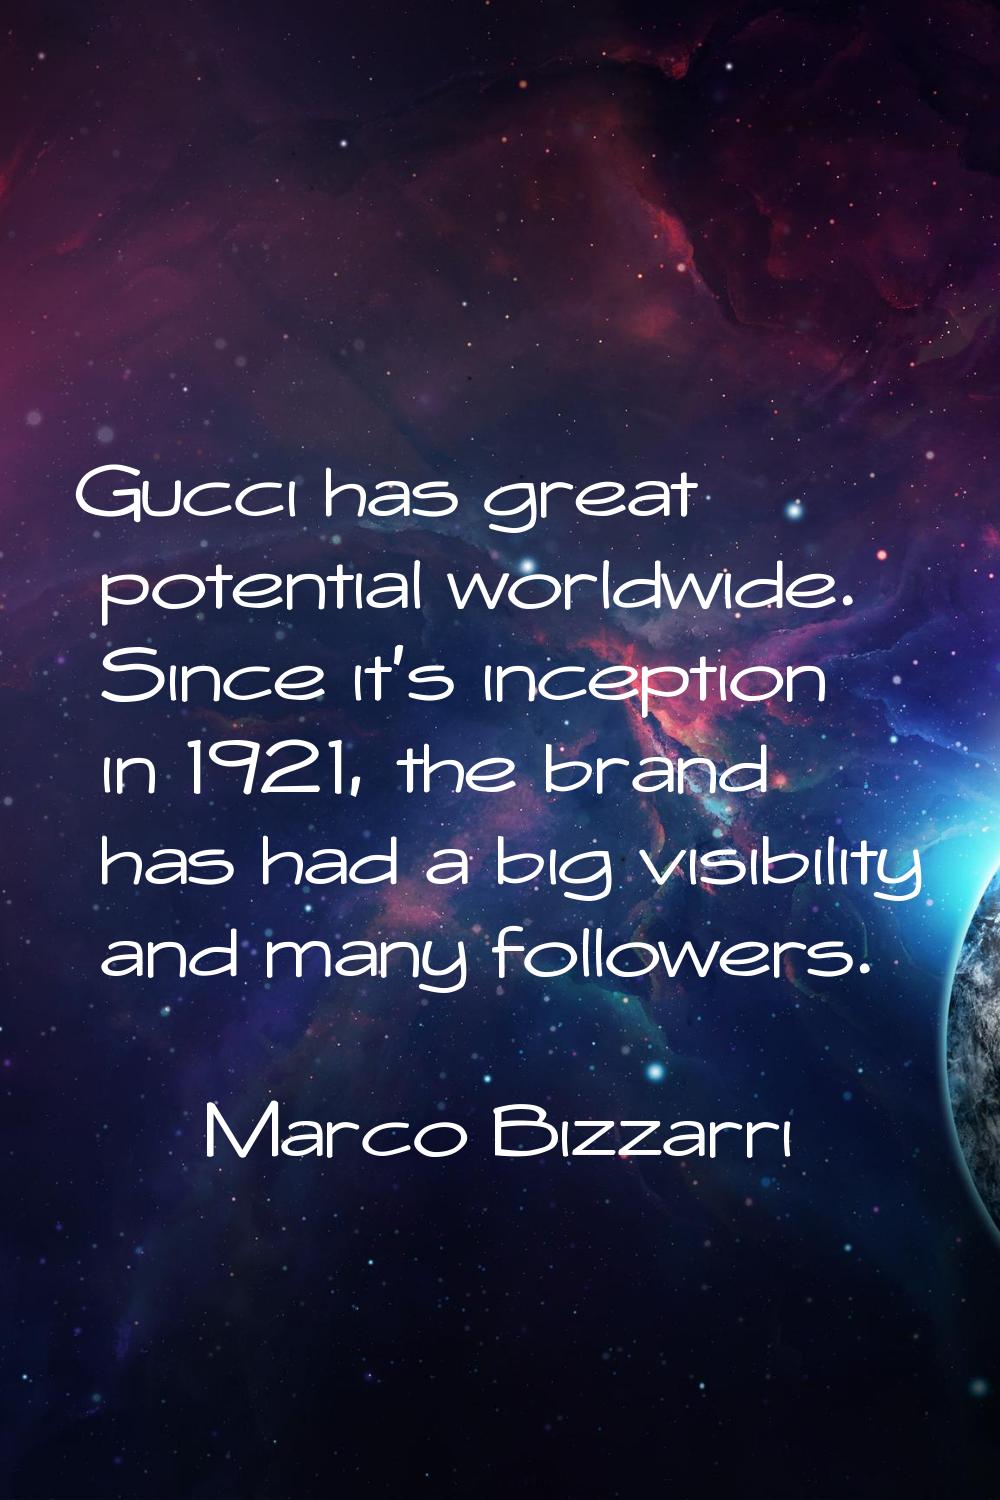 Gucci has great potential worldwide. Since it's inception in 1921, the brand has had a big visibili